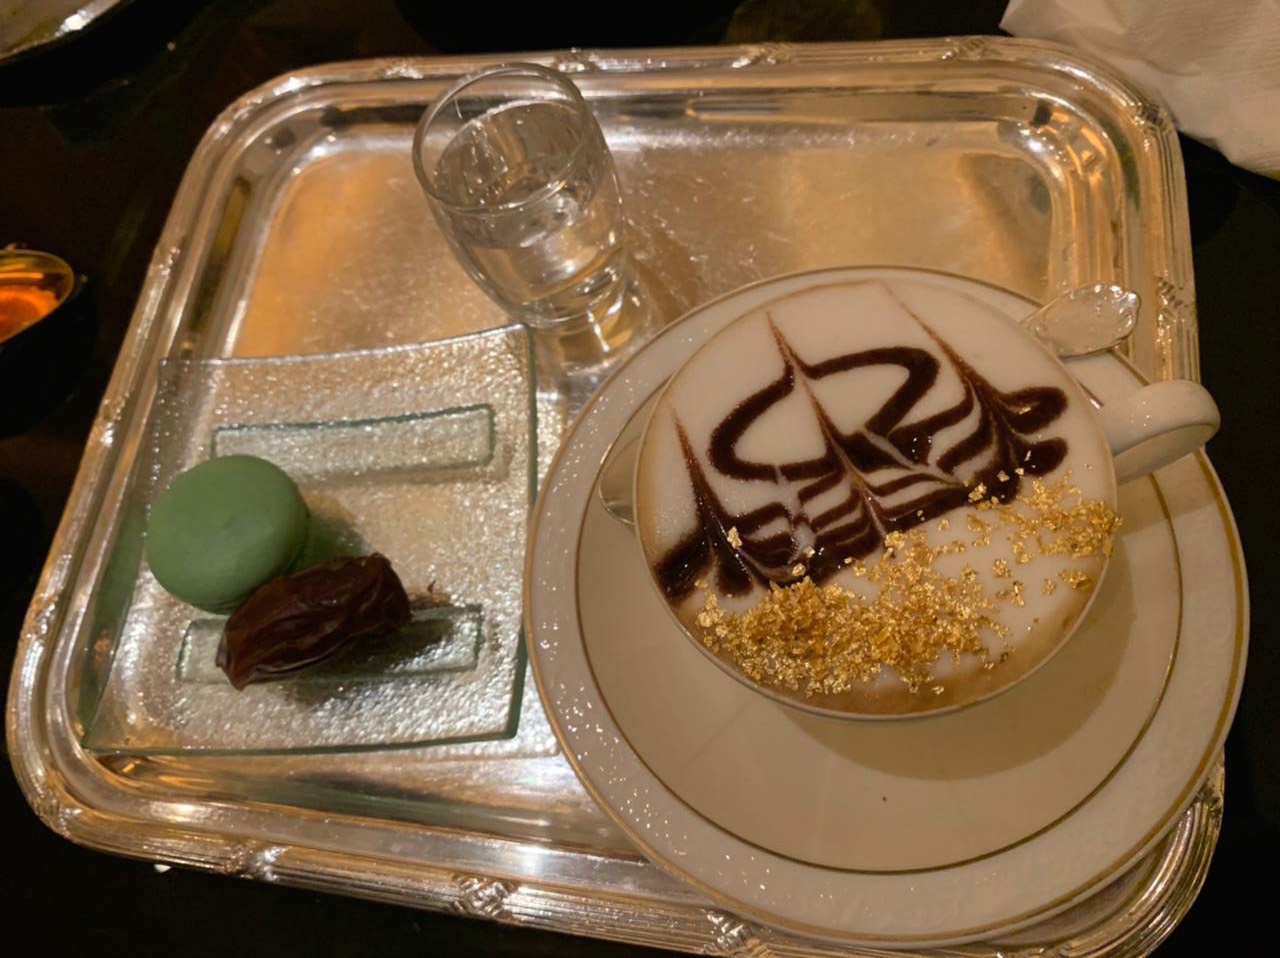 The most expensive cappuccino...24K Gold Flaked Palace Cappuccino at Emirates Palace Hotel